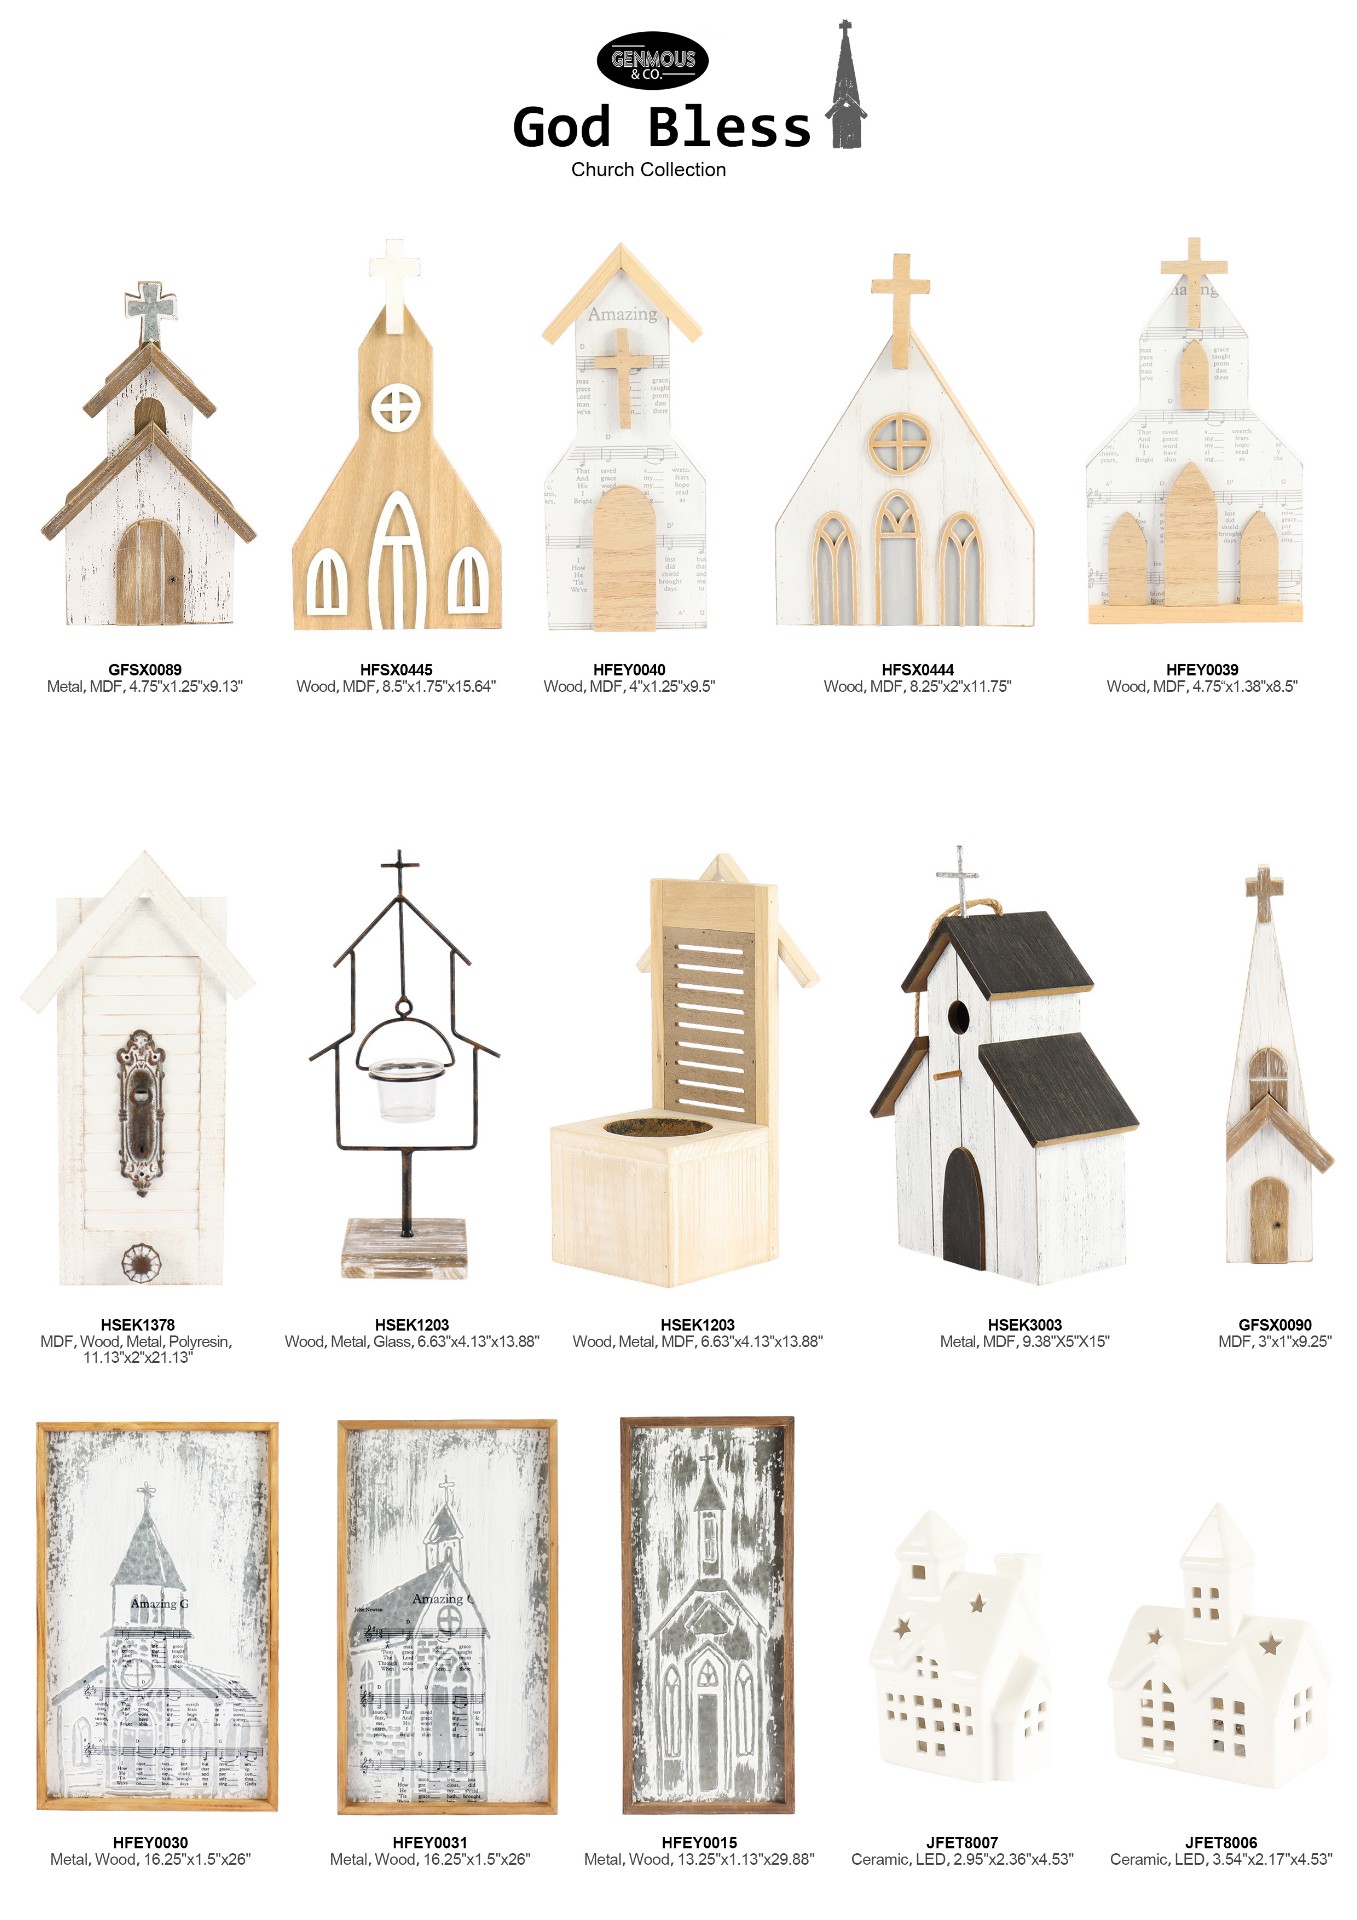 Catalog-GenMous God Bless Church Collection